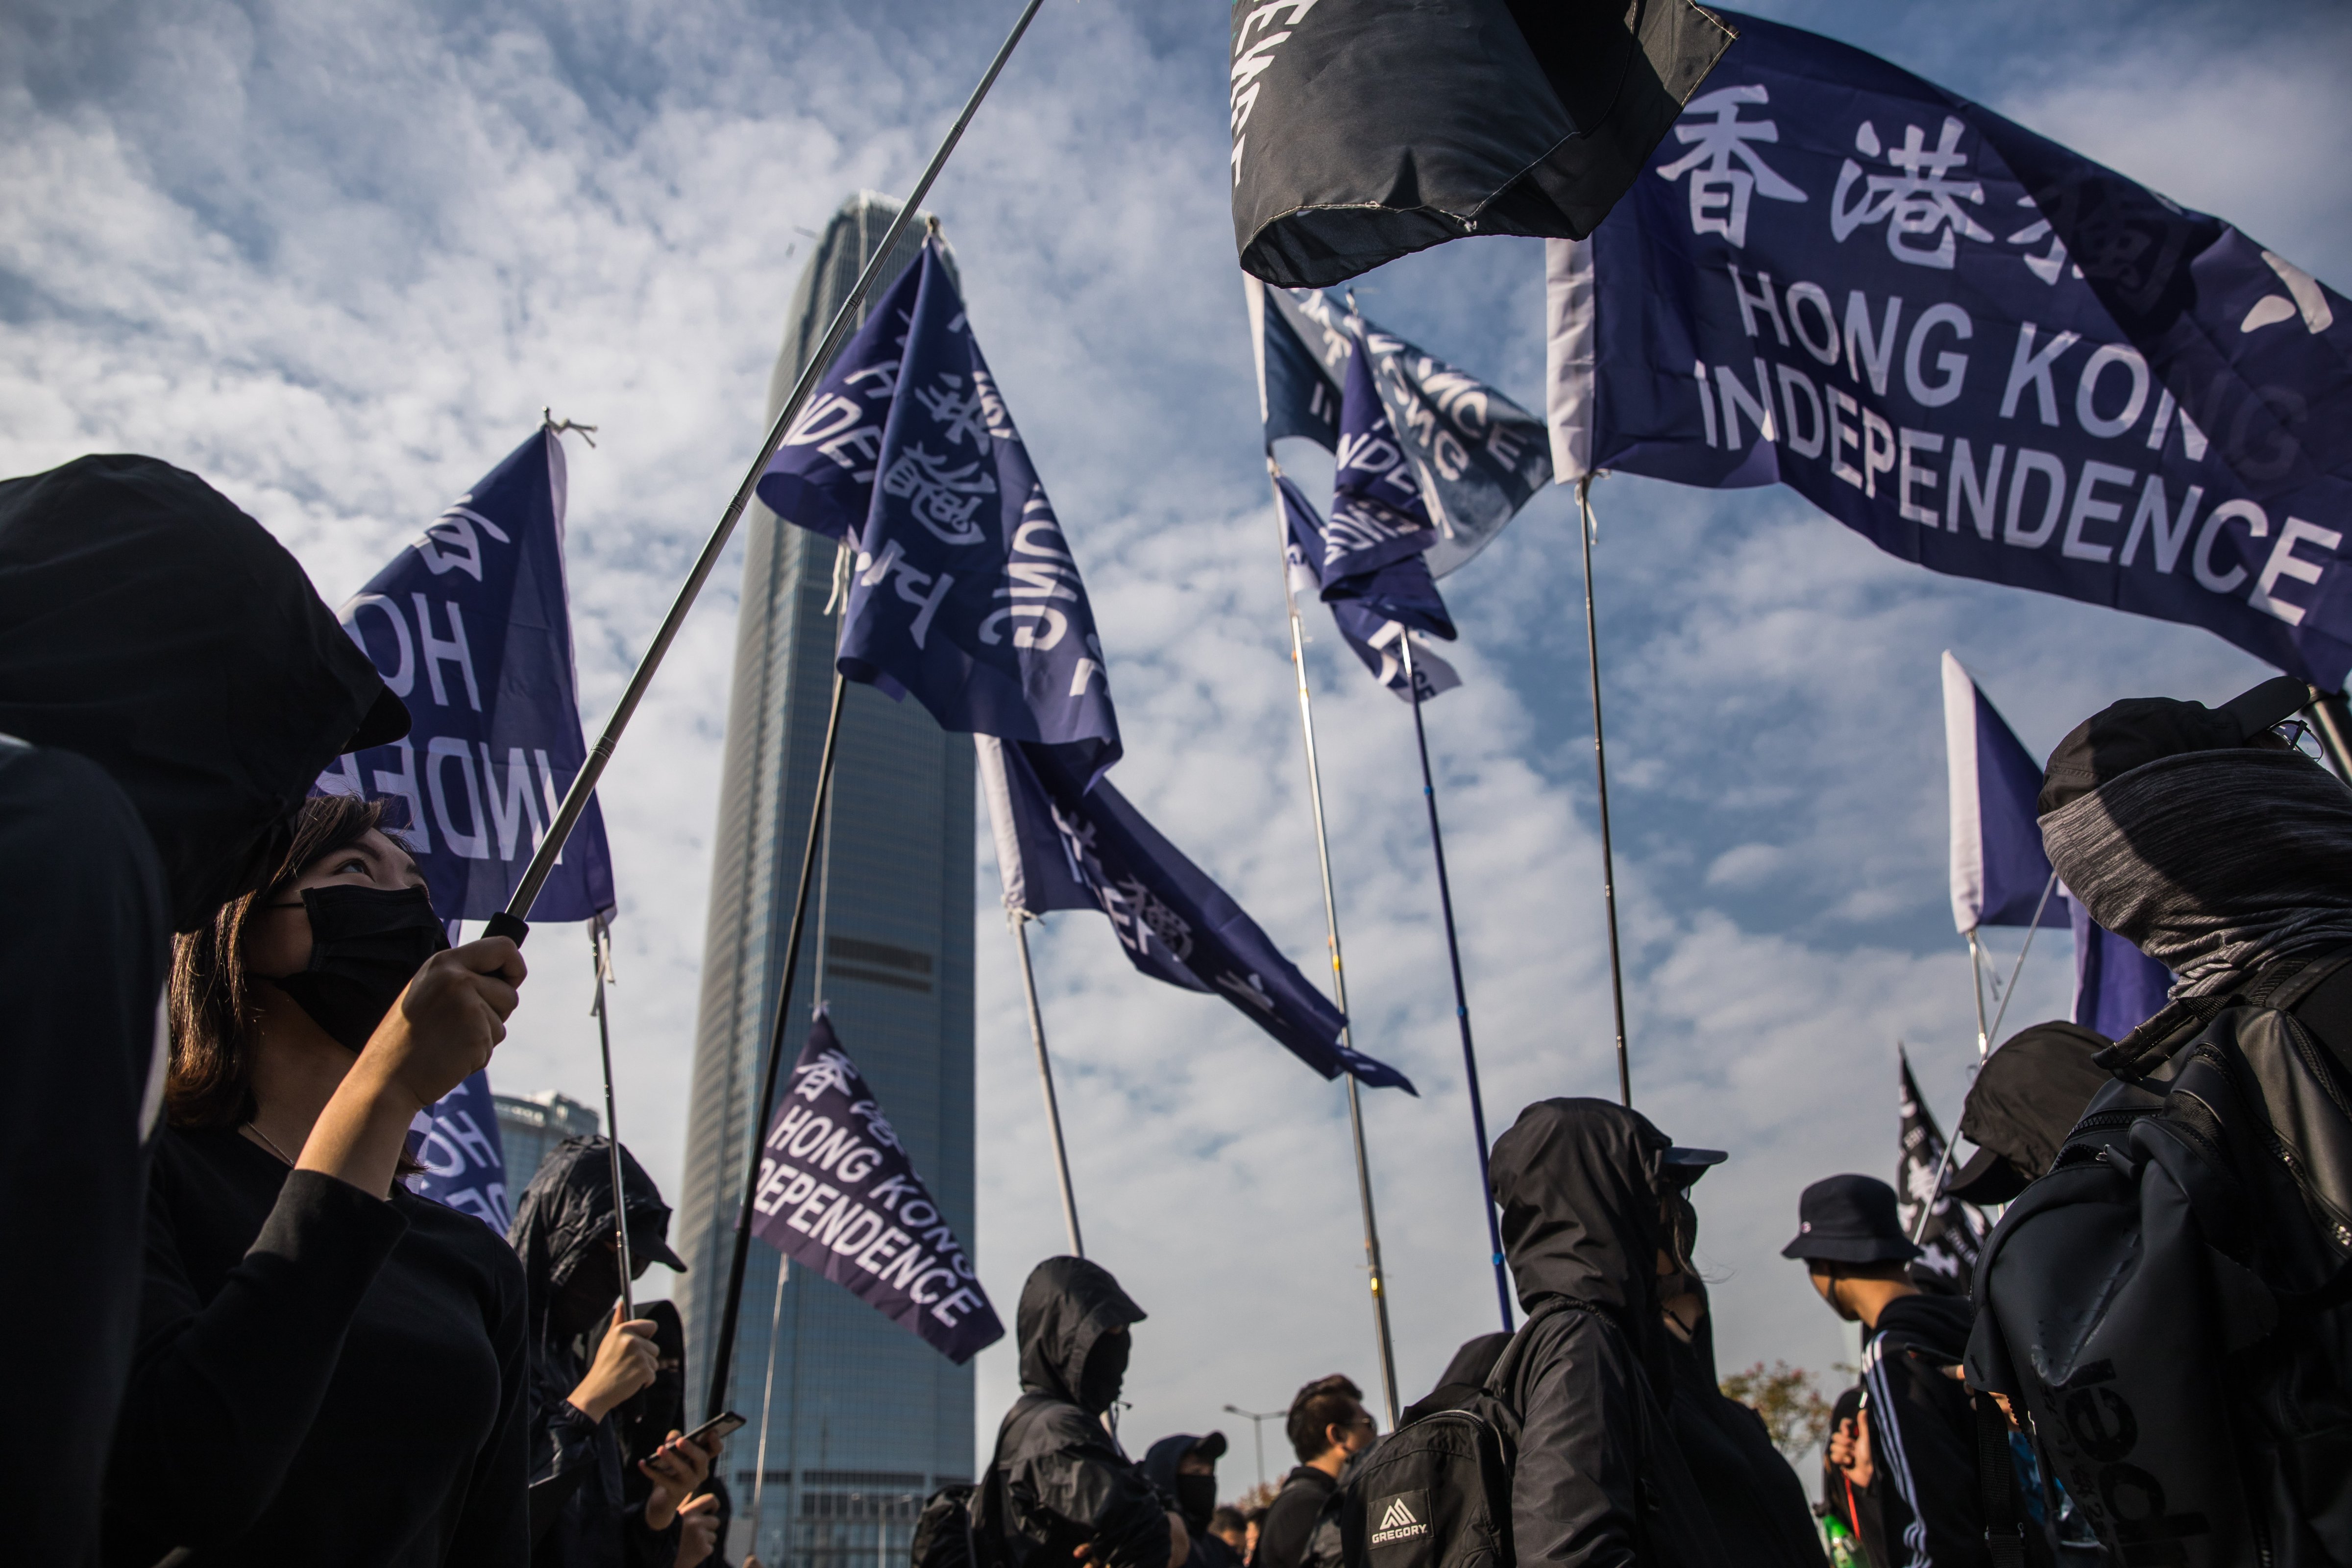 A group of Hong Kong independence supporters display flags during a pro-democracy rally at Edinburgh Place in the Central district of Hong Kong on January 12, 2020. (DALE DE LA REY/AFP via Getty Images)